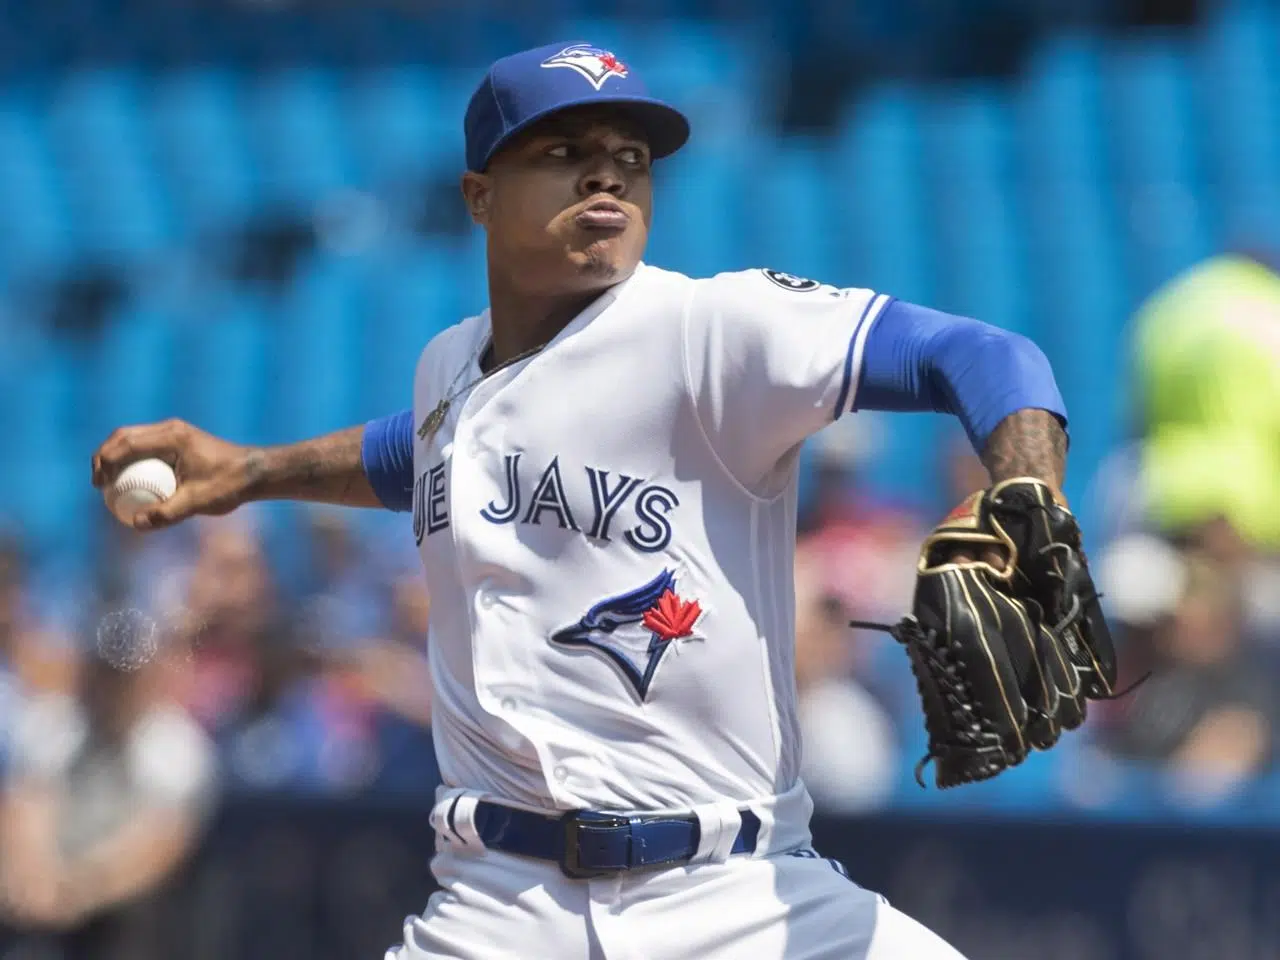 Marcus Stroman got a massive tattoo that shows his love for the